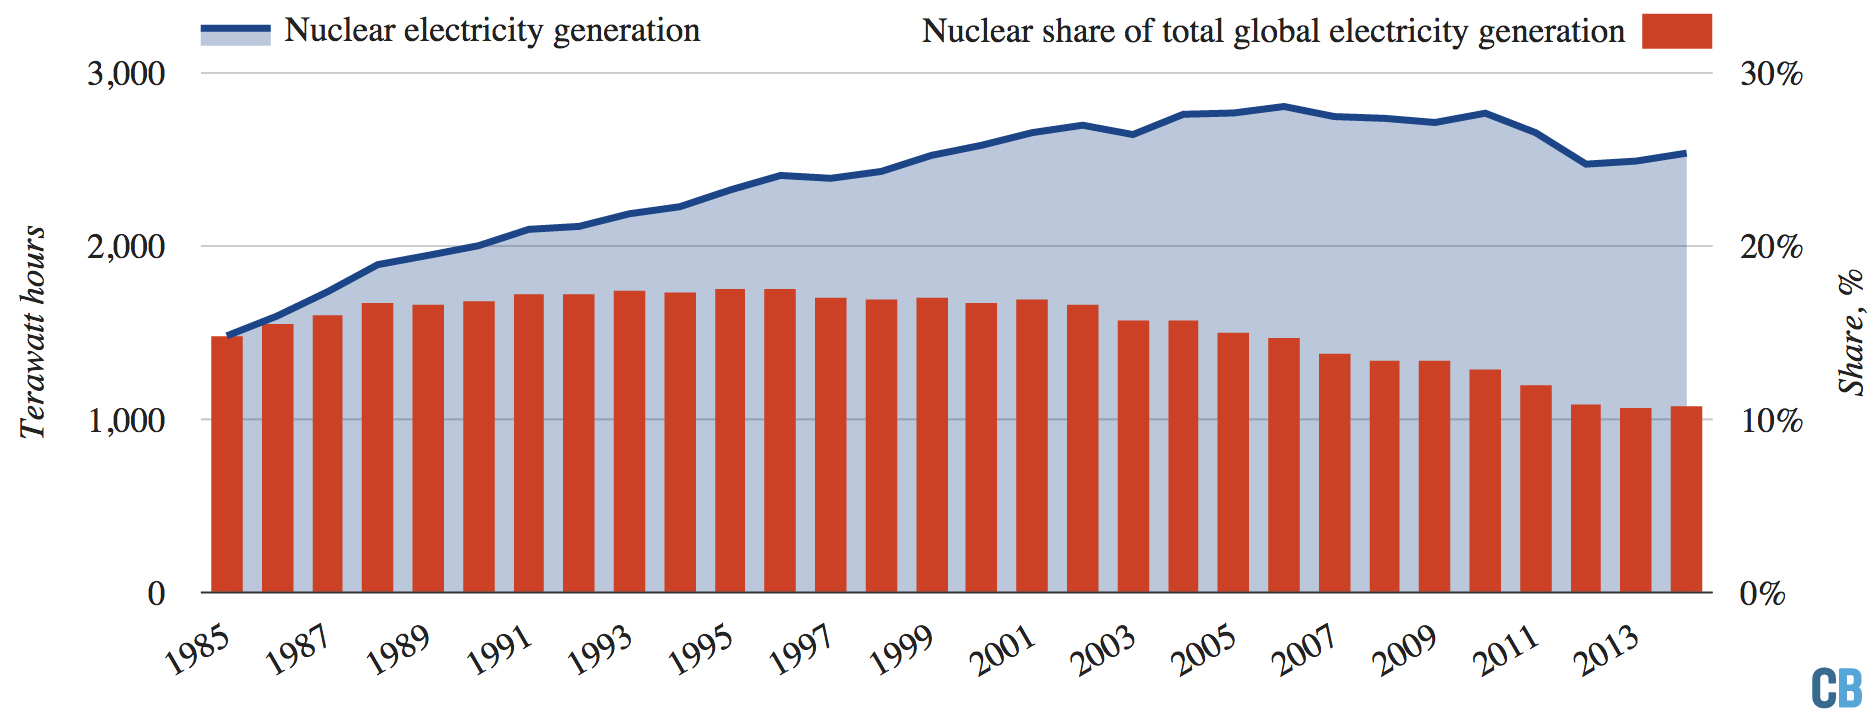 Graph showing nuclear electricity generation